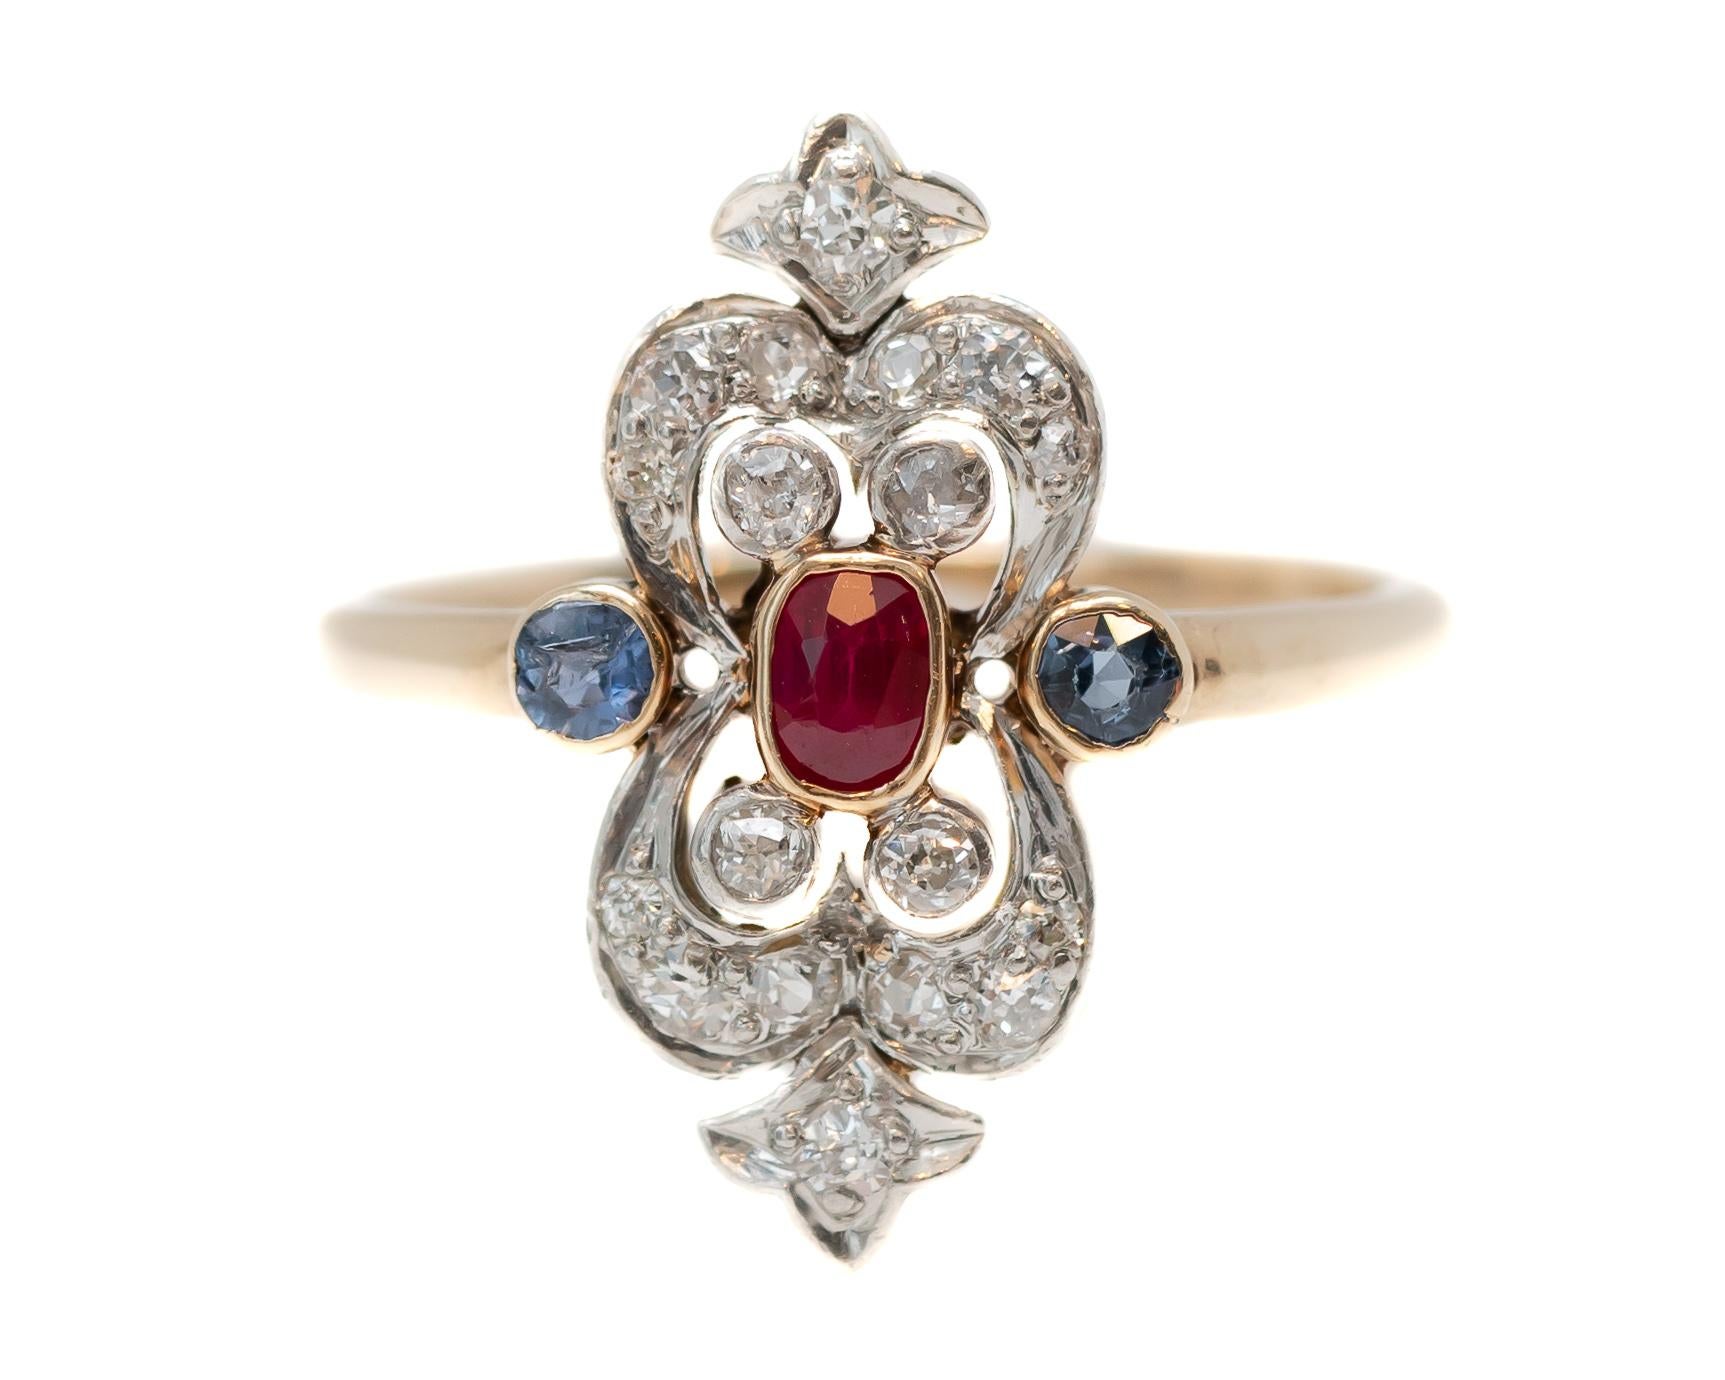 1910s Victorian Era Shield Ring featuring 14 karat Yellow Gold, Platinum, Ruby, Diamonds and Sapphires

Features:
Elongated Cushion cut, Natural Ruby Center Stone, Bezel set 
Round Accent Diamonds, Prong Set, Color: H-I, Clarity: VS-Si
2 Round